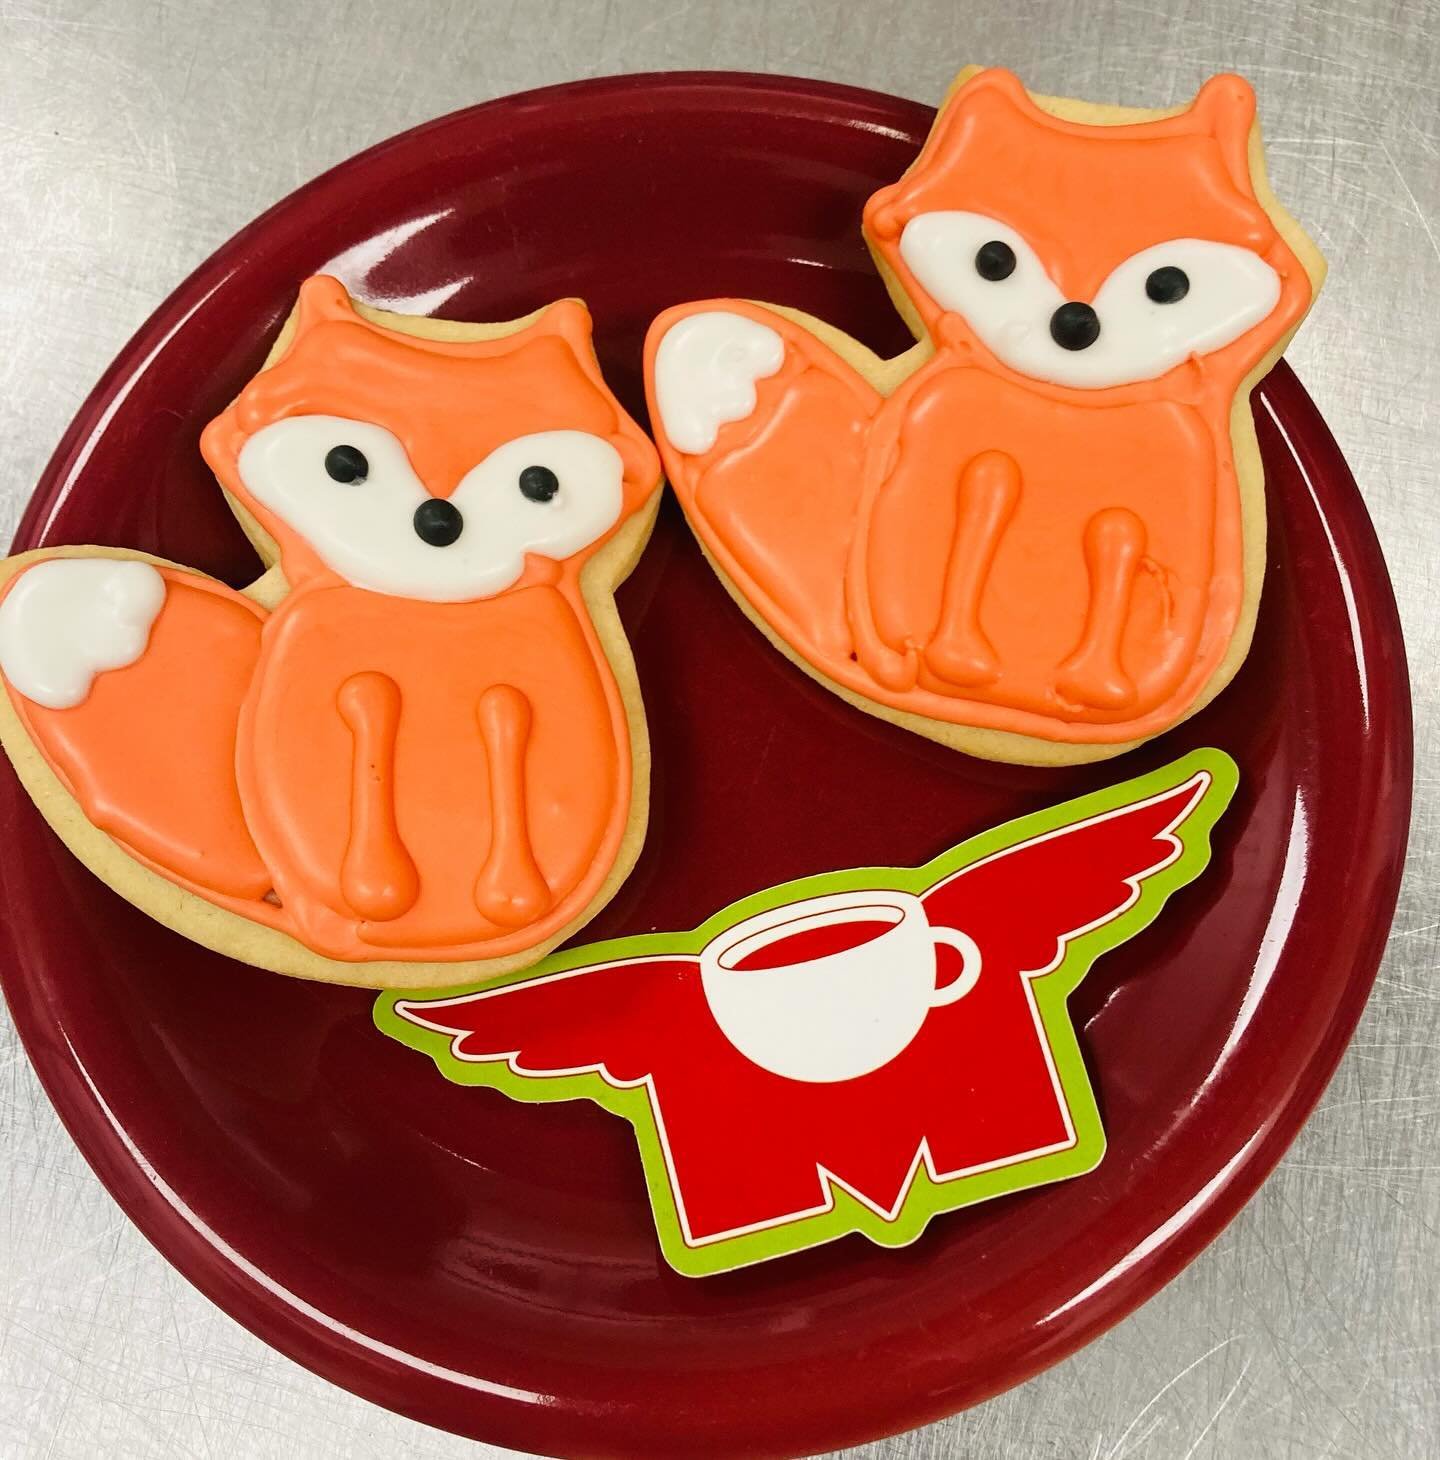 It&rsquo;s Sugar Cookie Friday! Keep it foxy this weekend! 😉 #flyingmboise #flyingm #downtownboise